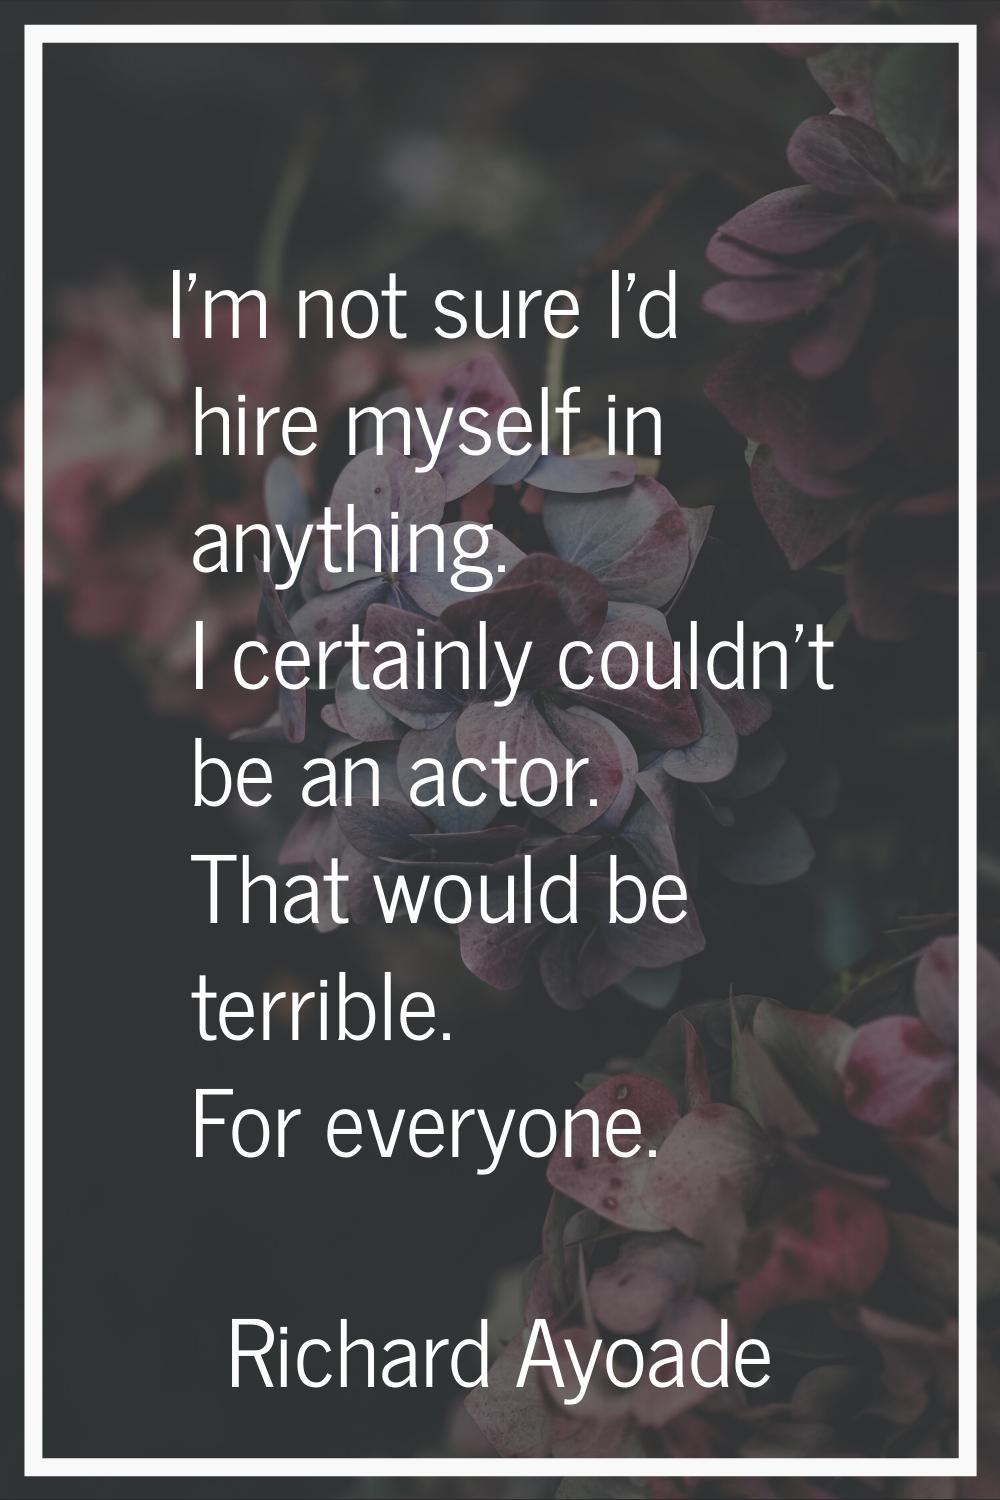 I'm not sure I'd hire myself in anything. I certainly couldn't be an actor. That would be terrible.